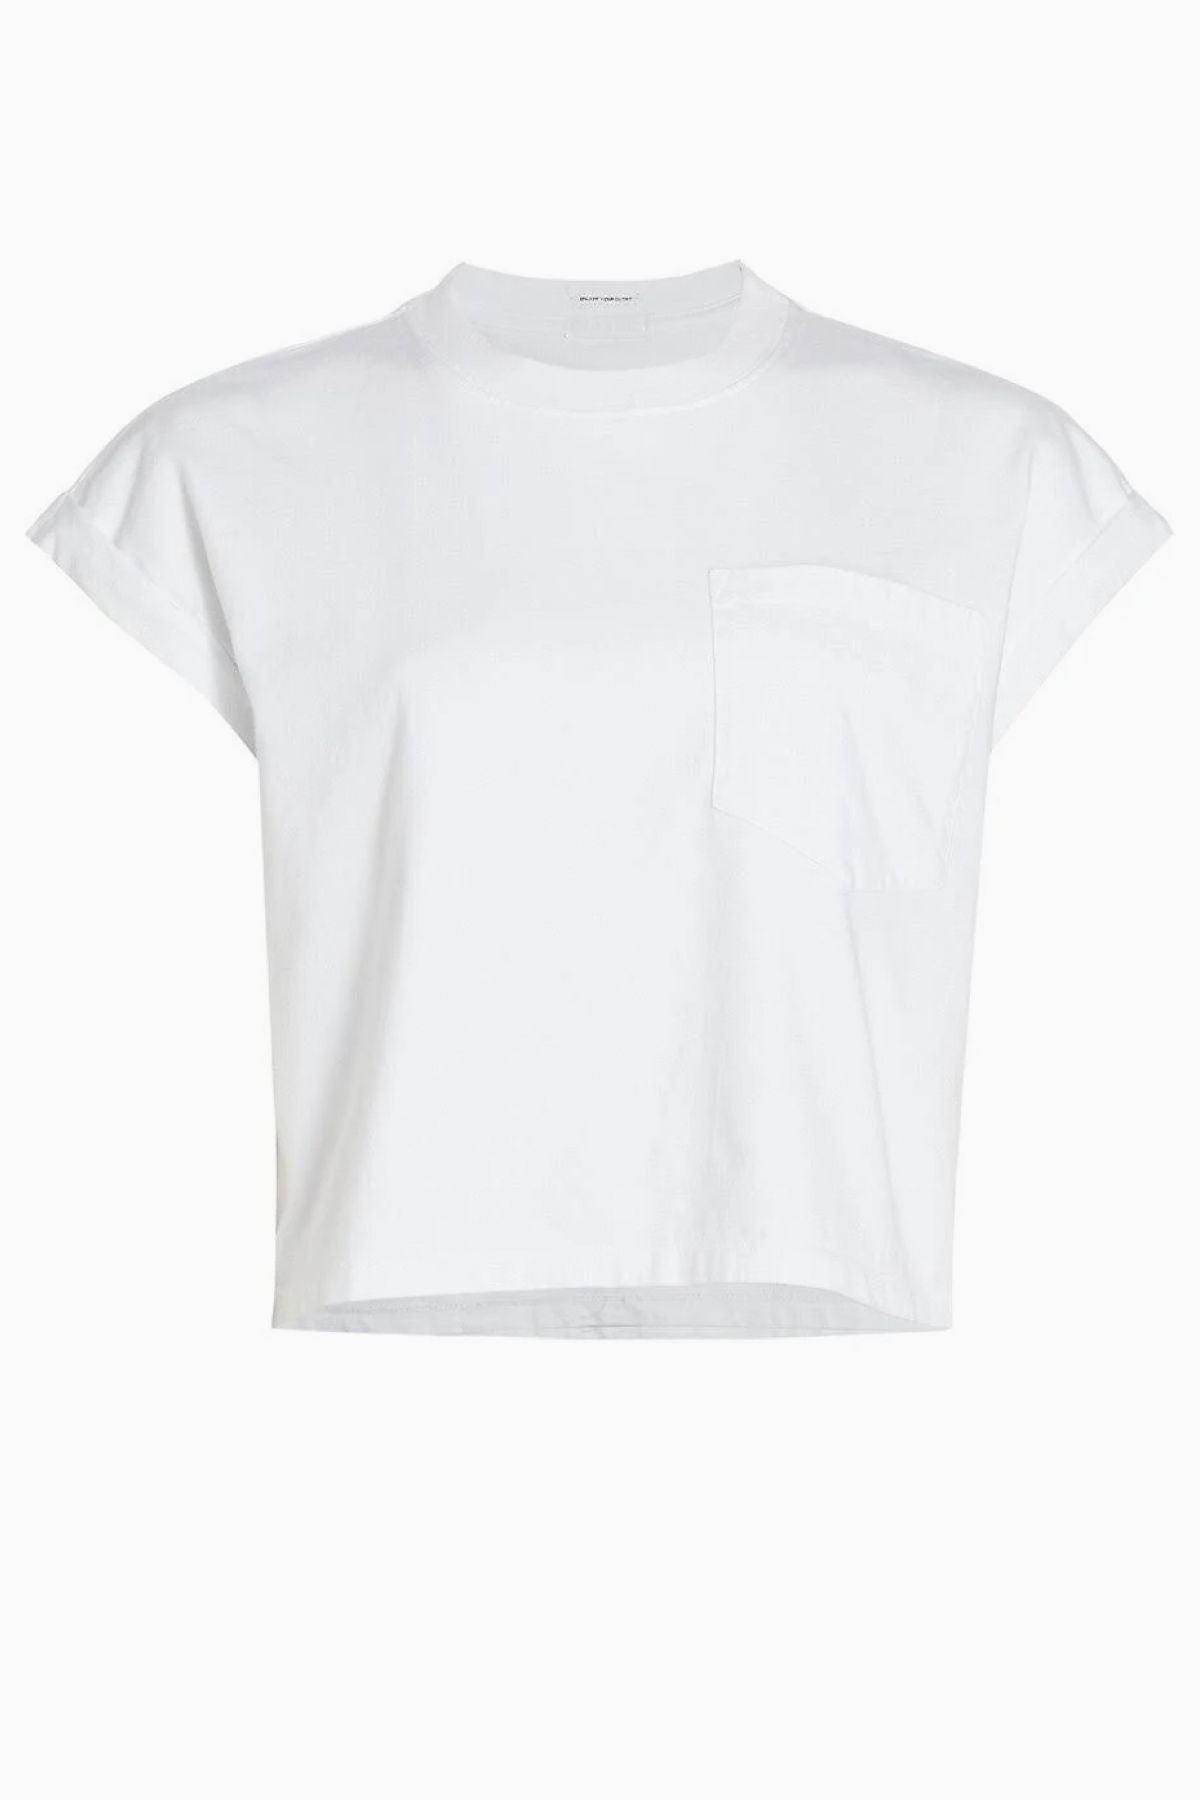 Mother Denim The Keep on Rolling Pocket Tee - Bright White